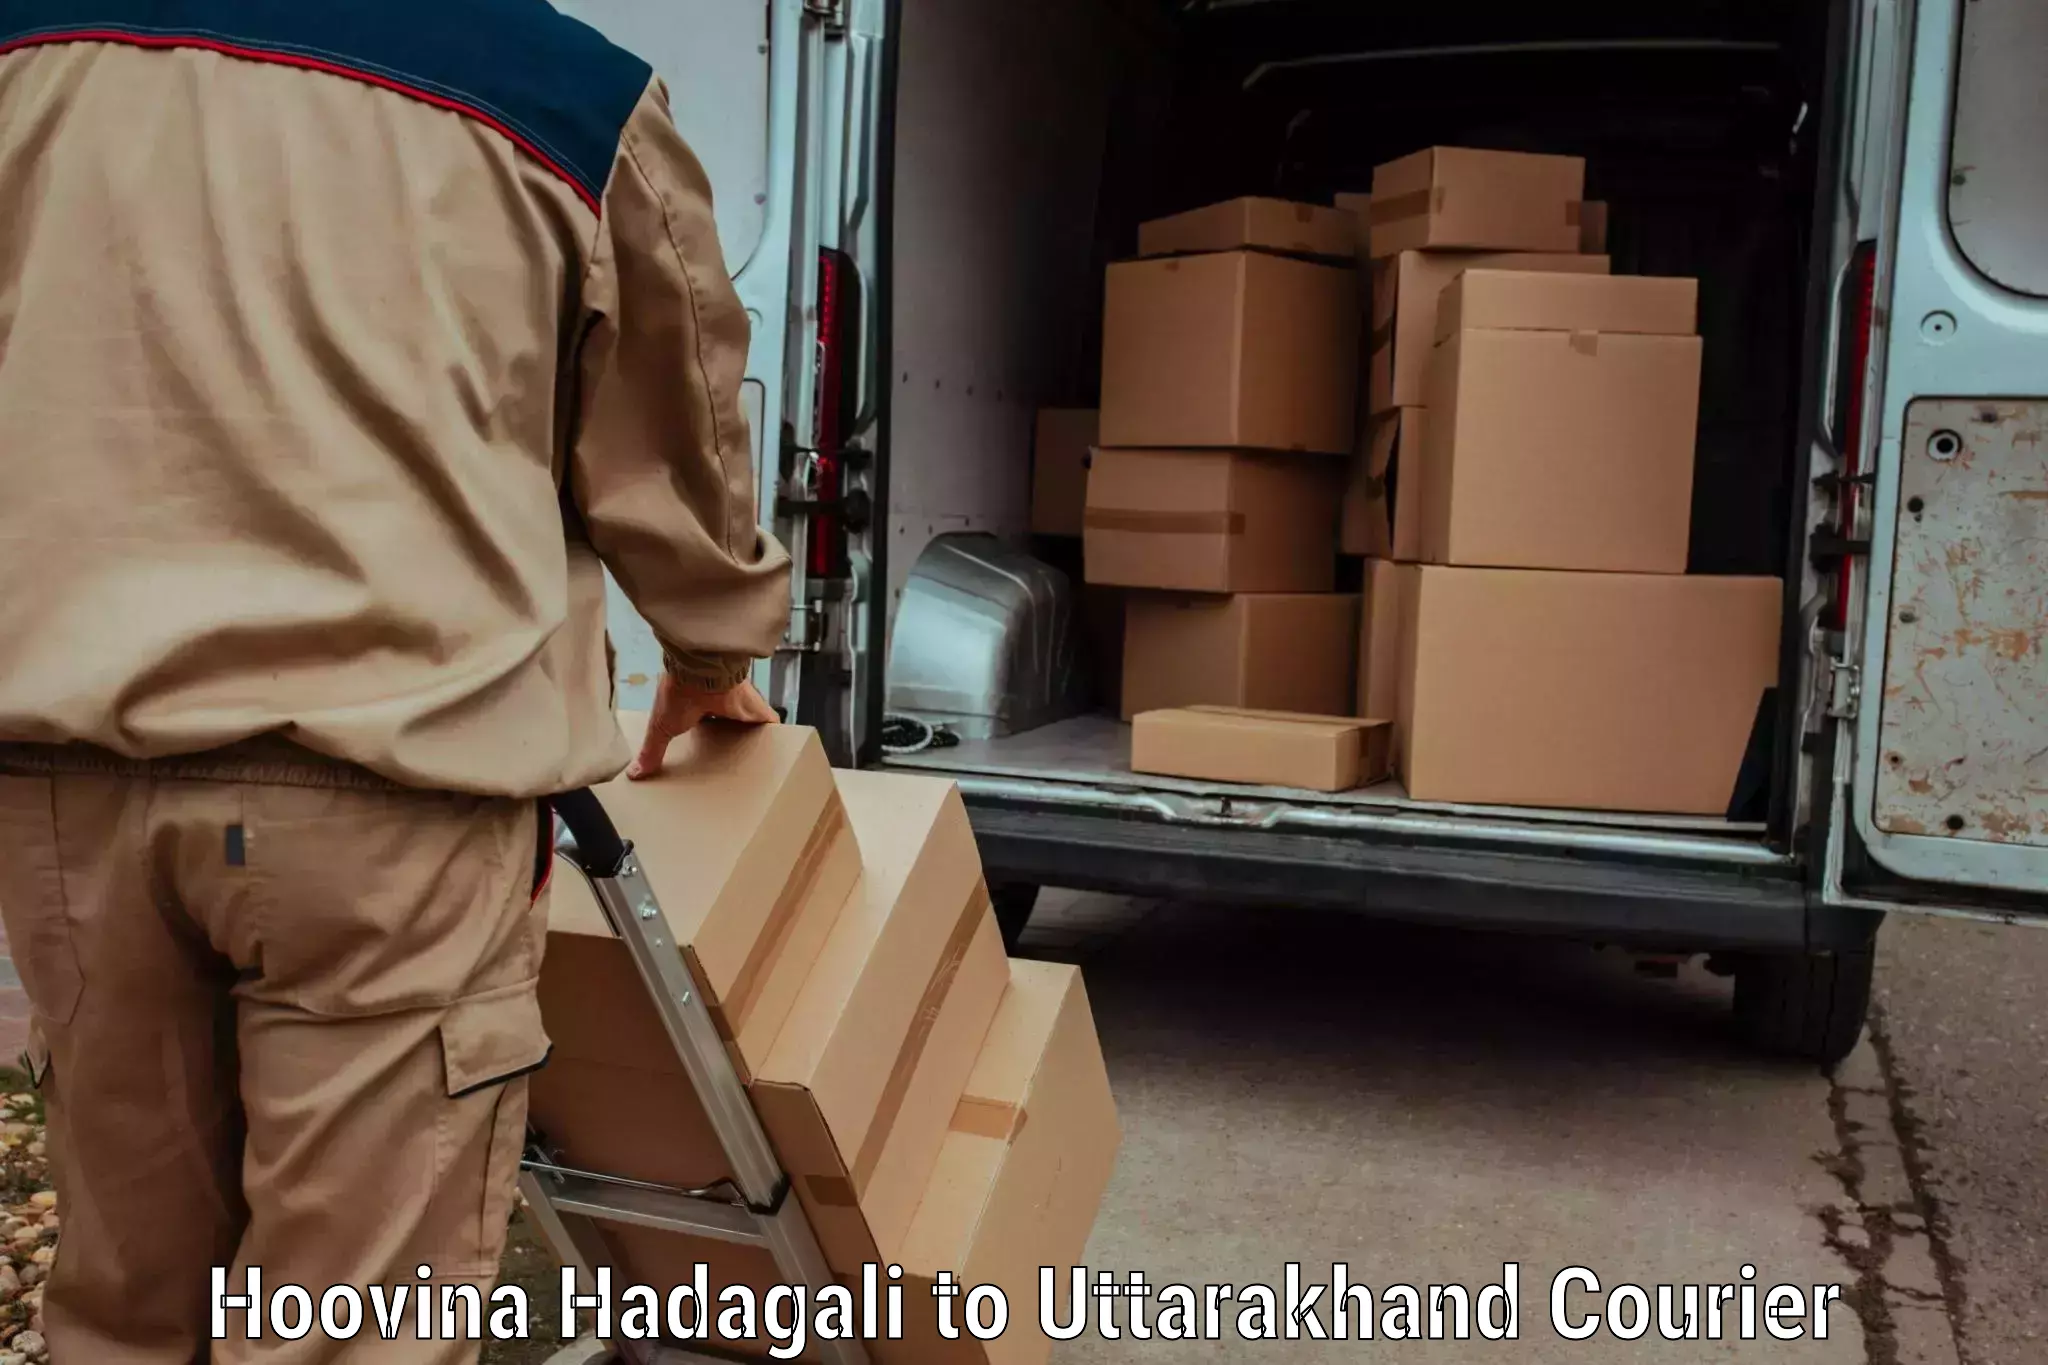 Advanced freight services Hoovina Hadagali to Champawat